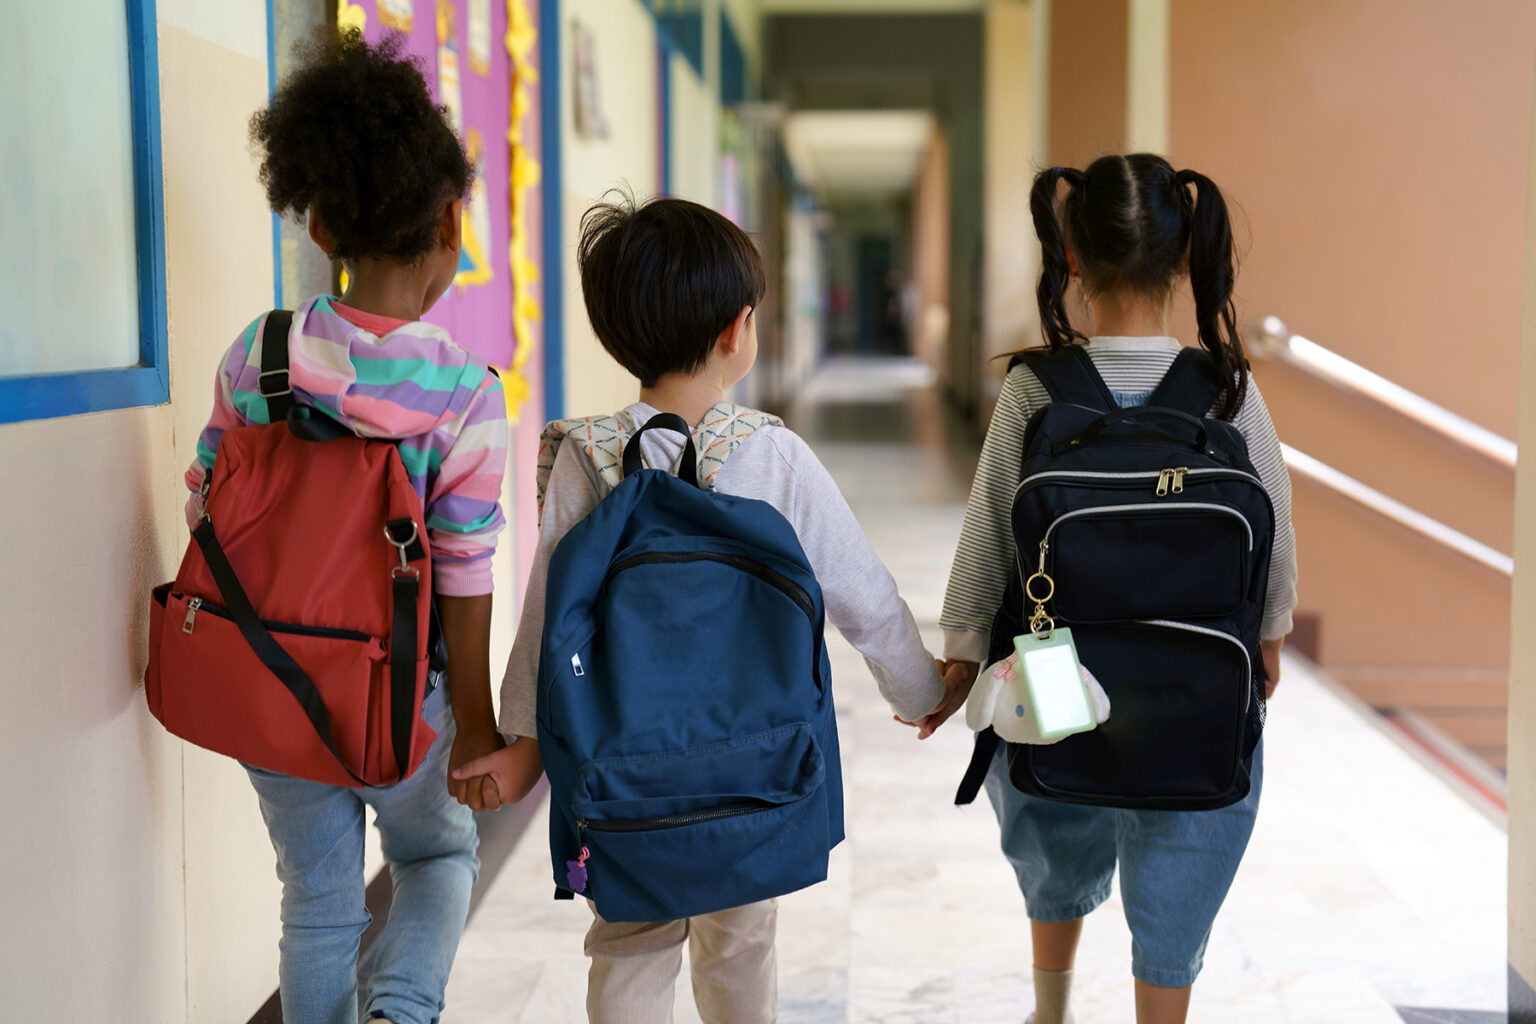 Three young children hold hands and walk away from camera down the school hallway. They all wear backpacks and casual clothes